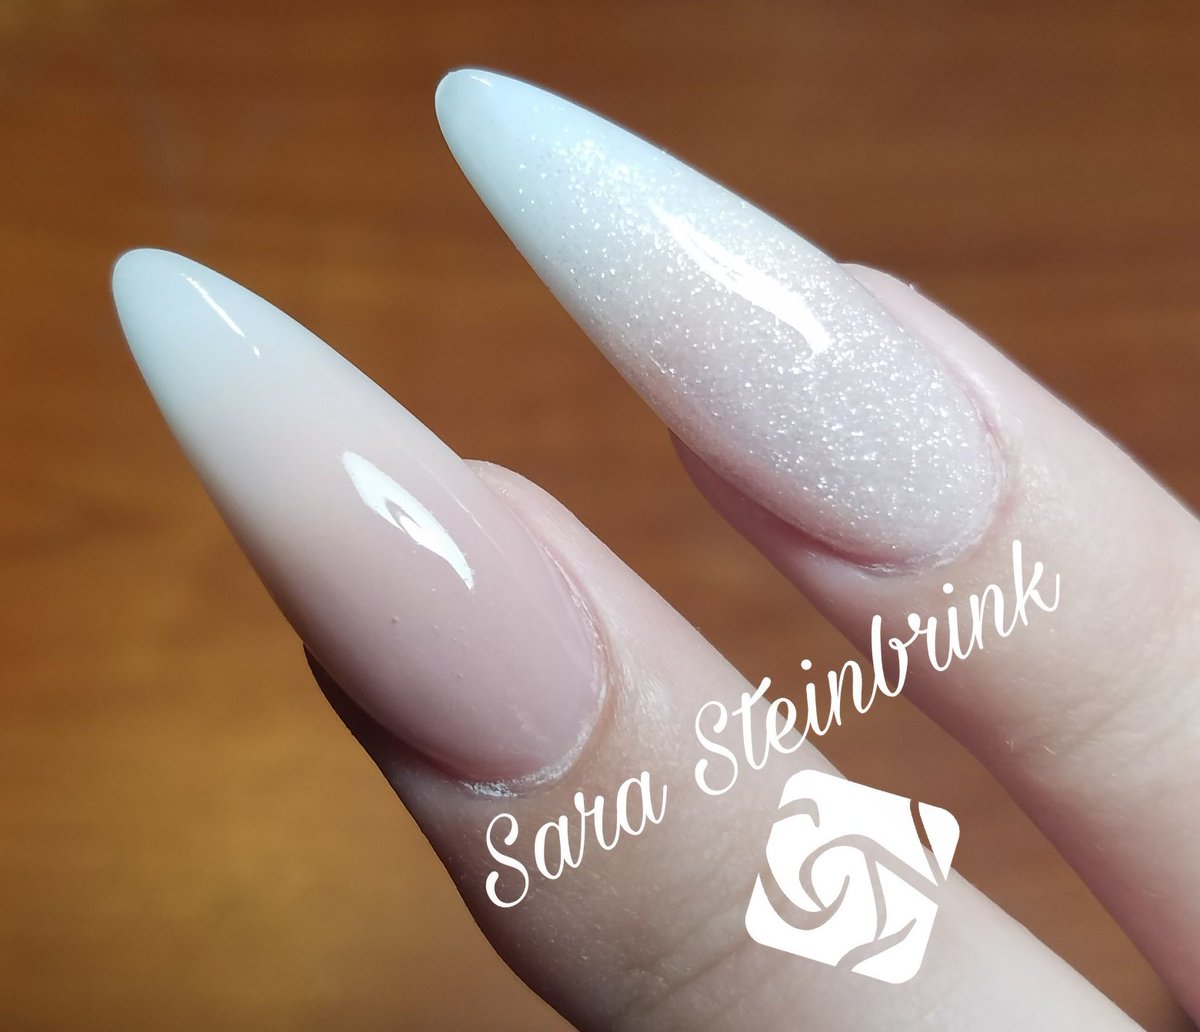 Sara Steinbrink With Or Without Glitter Crystalnails Crystalnailsusa Acrylicnails Babyboomer Frenchombre Almondnails Nails Glitter Notpolish T Co Tmi8jcqayo